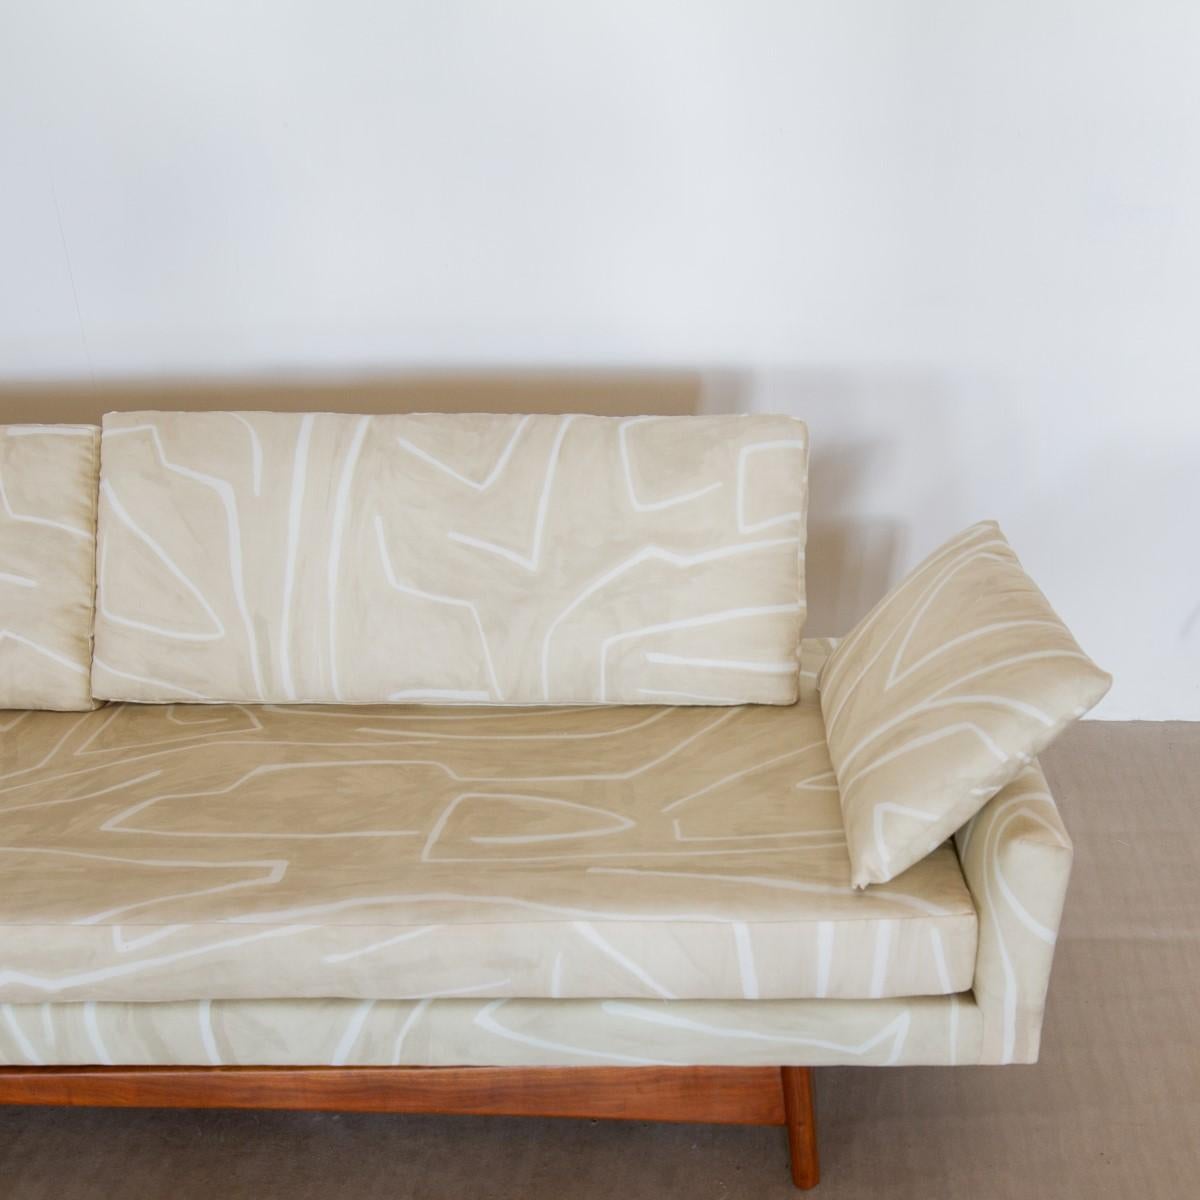 An Adrian Pearsall for Craft Associates, gondola sofa (model number 2408) with the iconic walnut base and upholstered by KBS in an ivory weave fabric, 1950s.